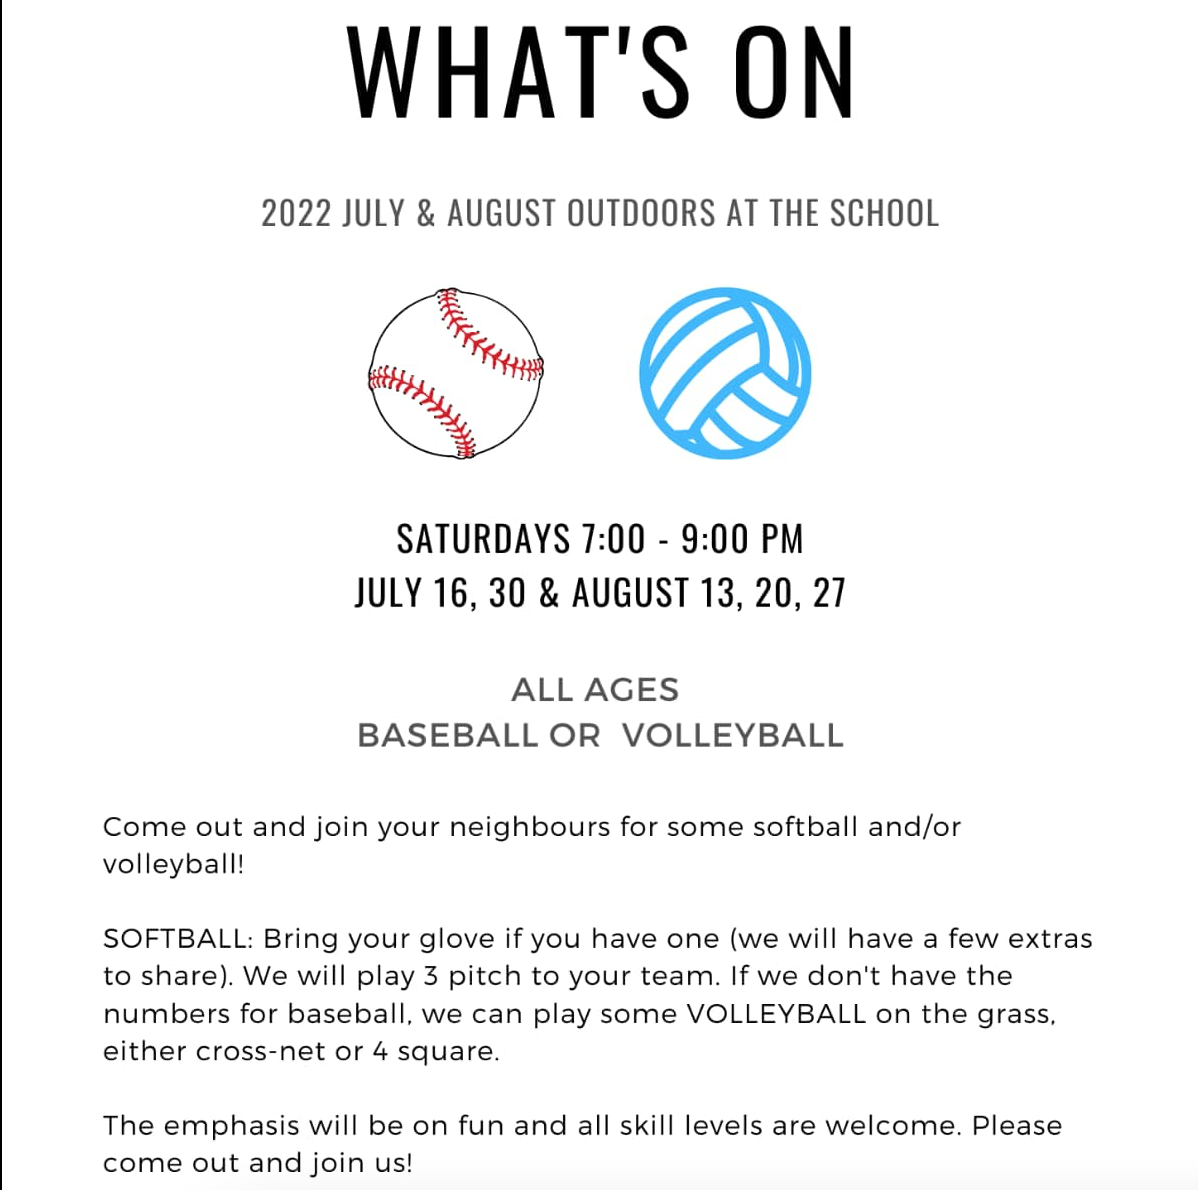 Baseball or Volleyball - All Ages @ AI School and Community Centre